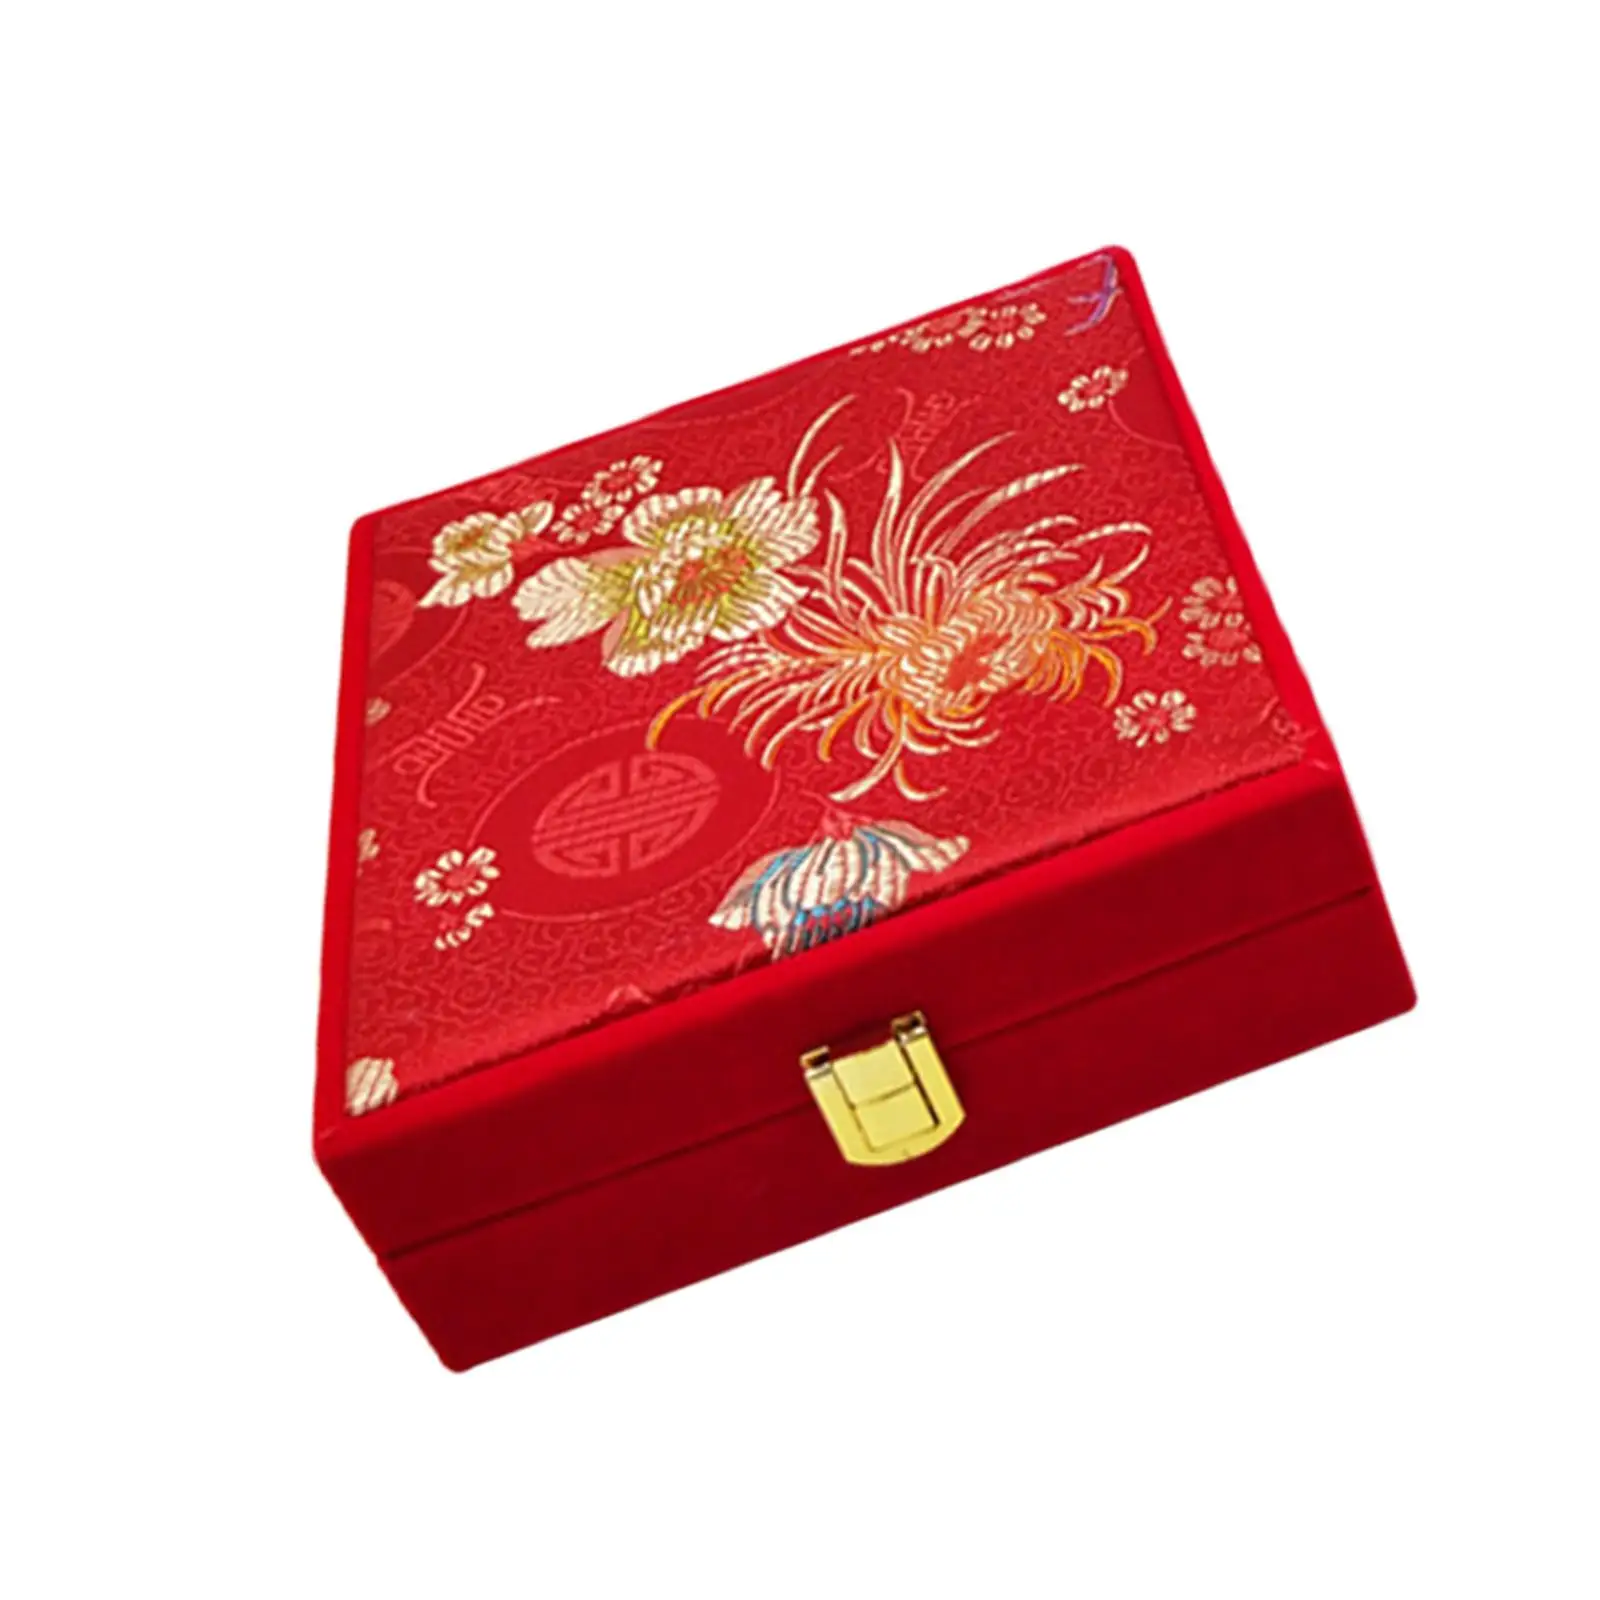 Chinese Style Jewelry Display Box, Trinket Rings Necklace Pendant Organizer for Wedding